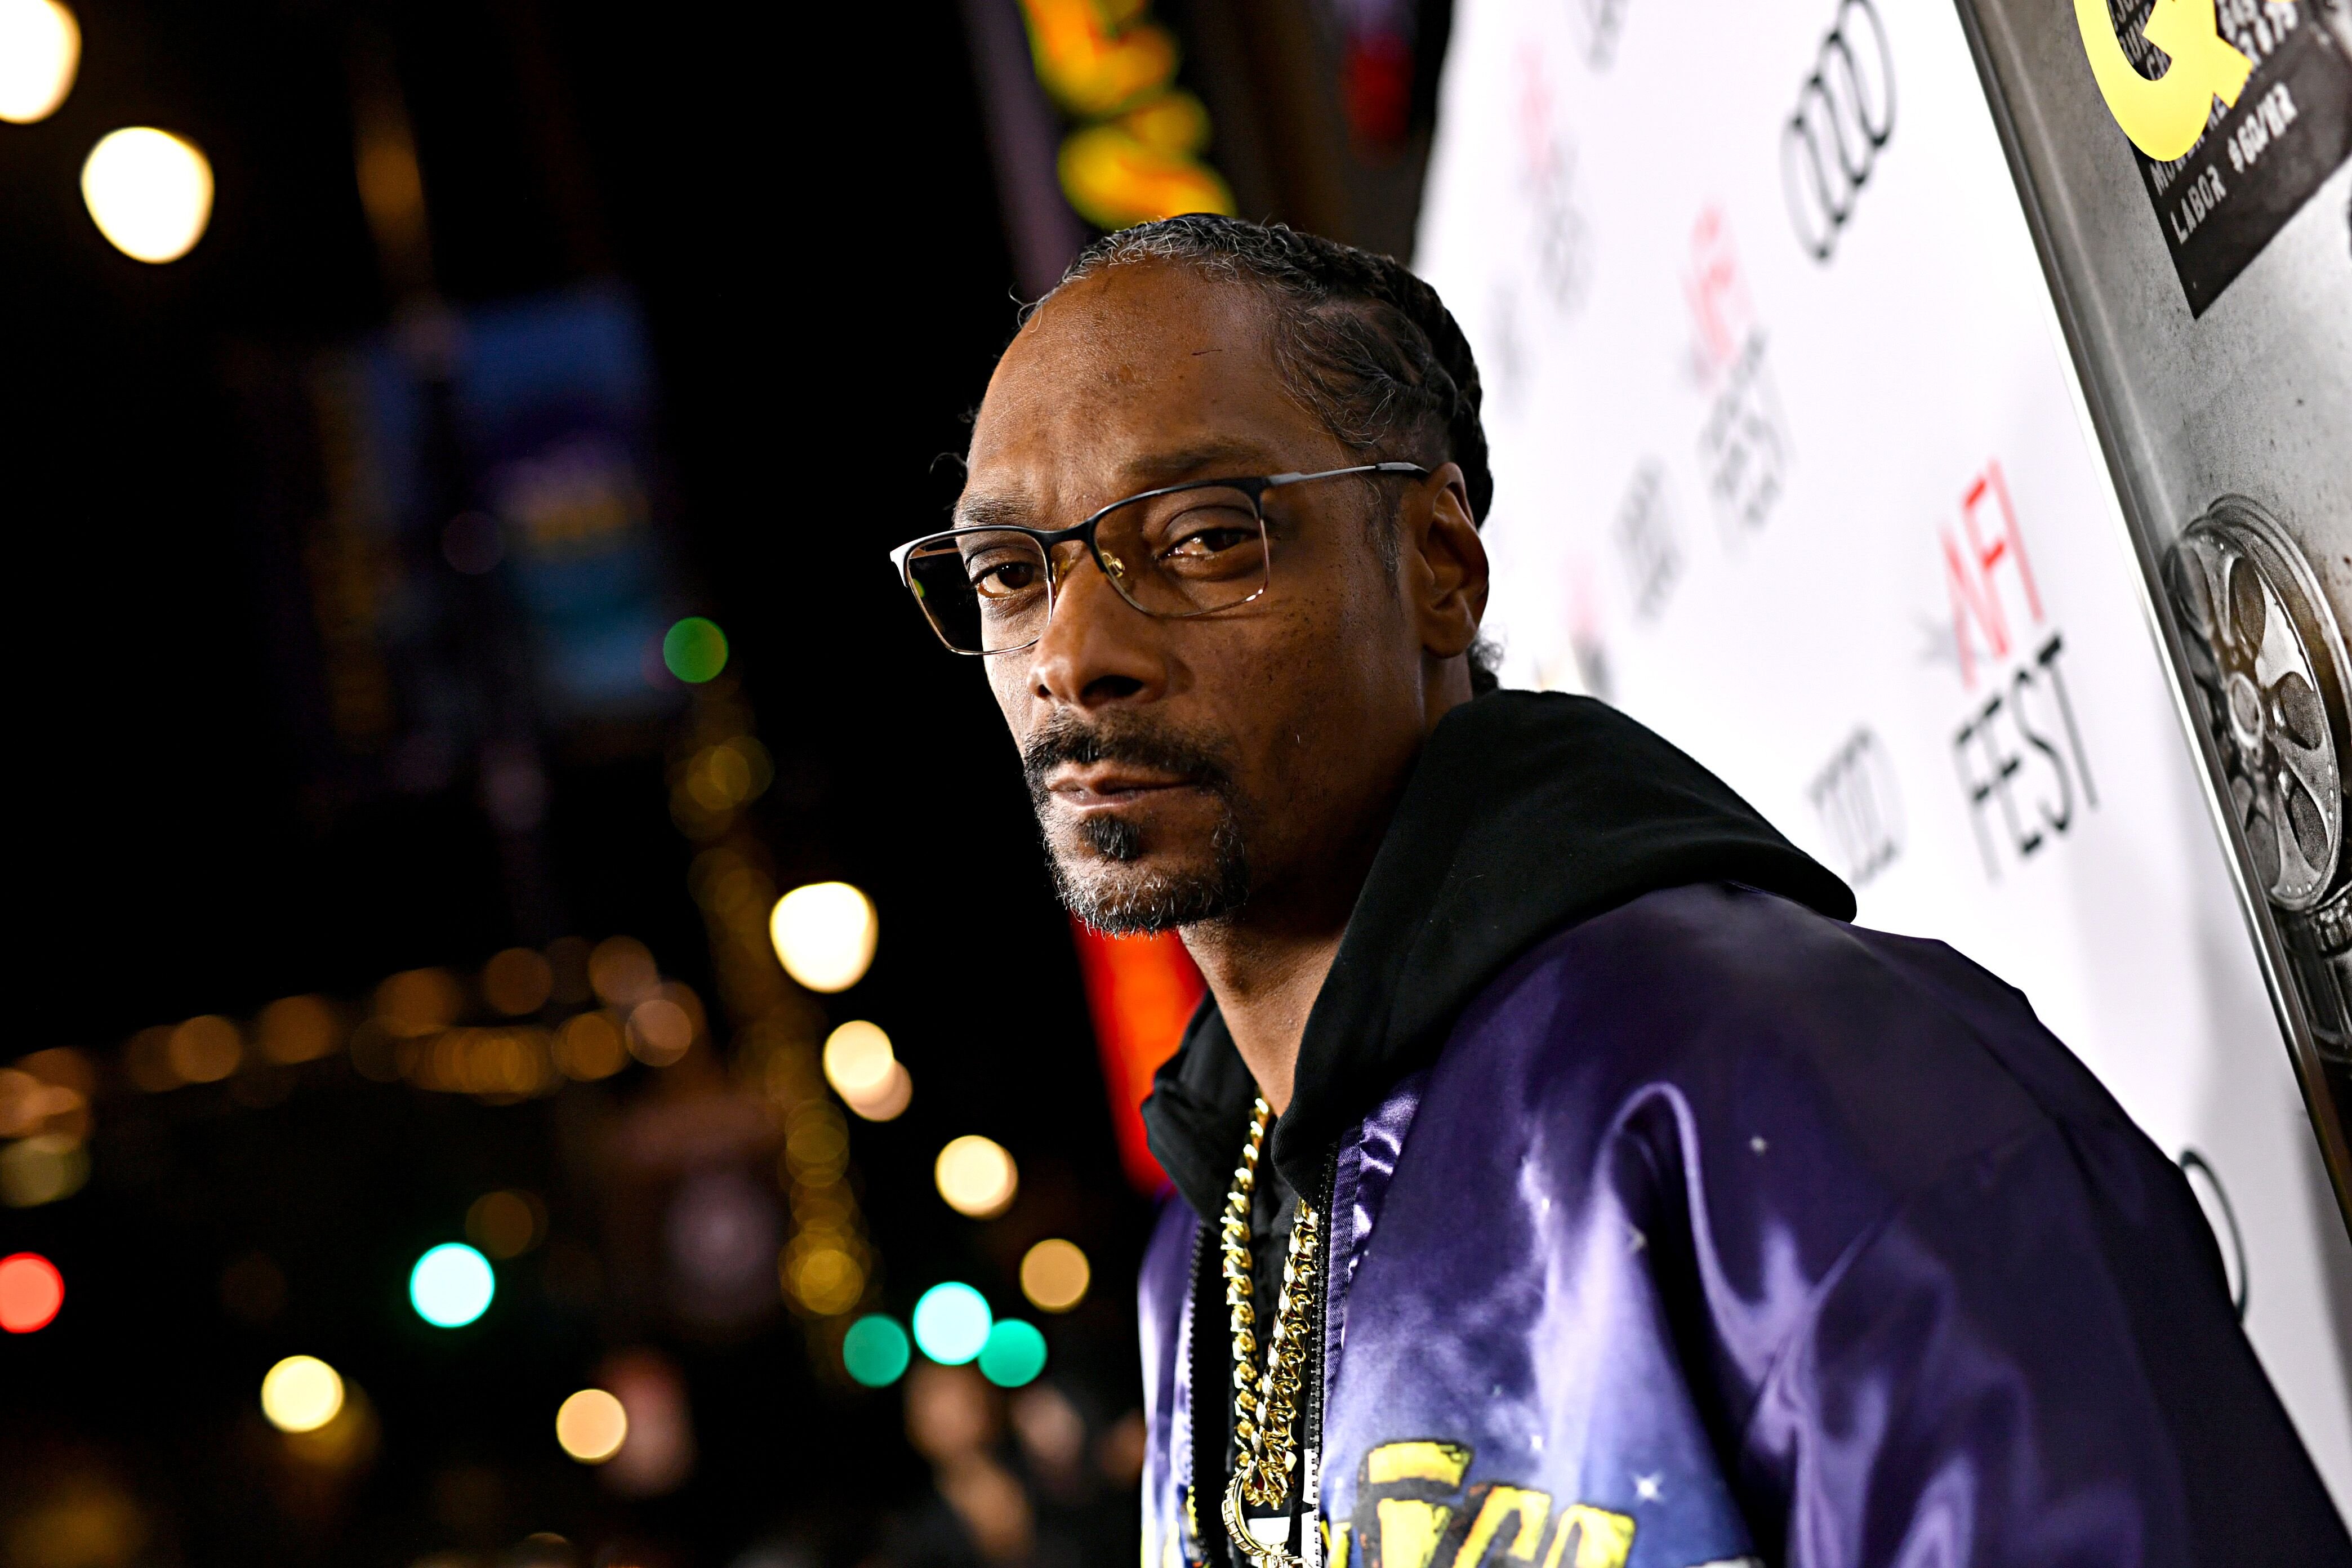 Snoop Dogg at the after party for the premiere of "Queen & Slim" at AFI FEST 2019, Hollywood on November 14, 2019.| Photo: Getty Images